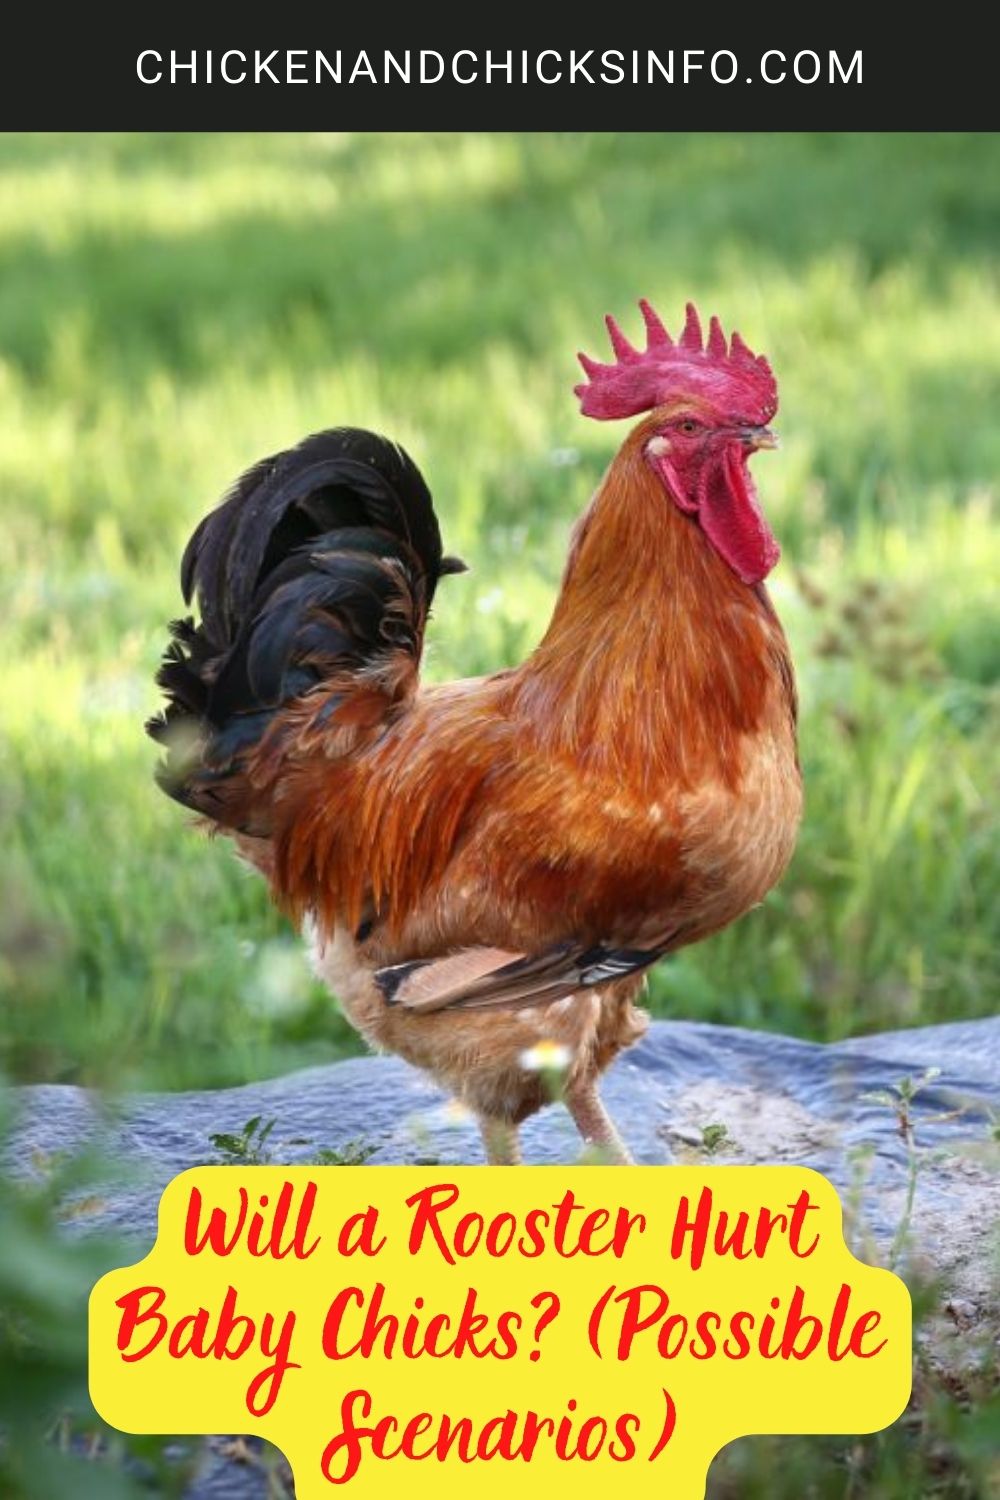 Will a Rooster Hurt Baby Chicks? (Possible Scenarios) poster.
